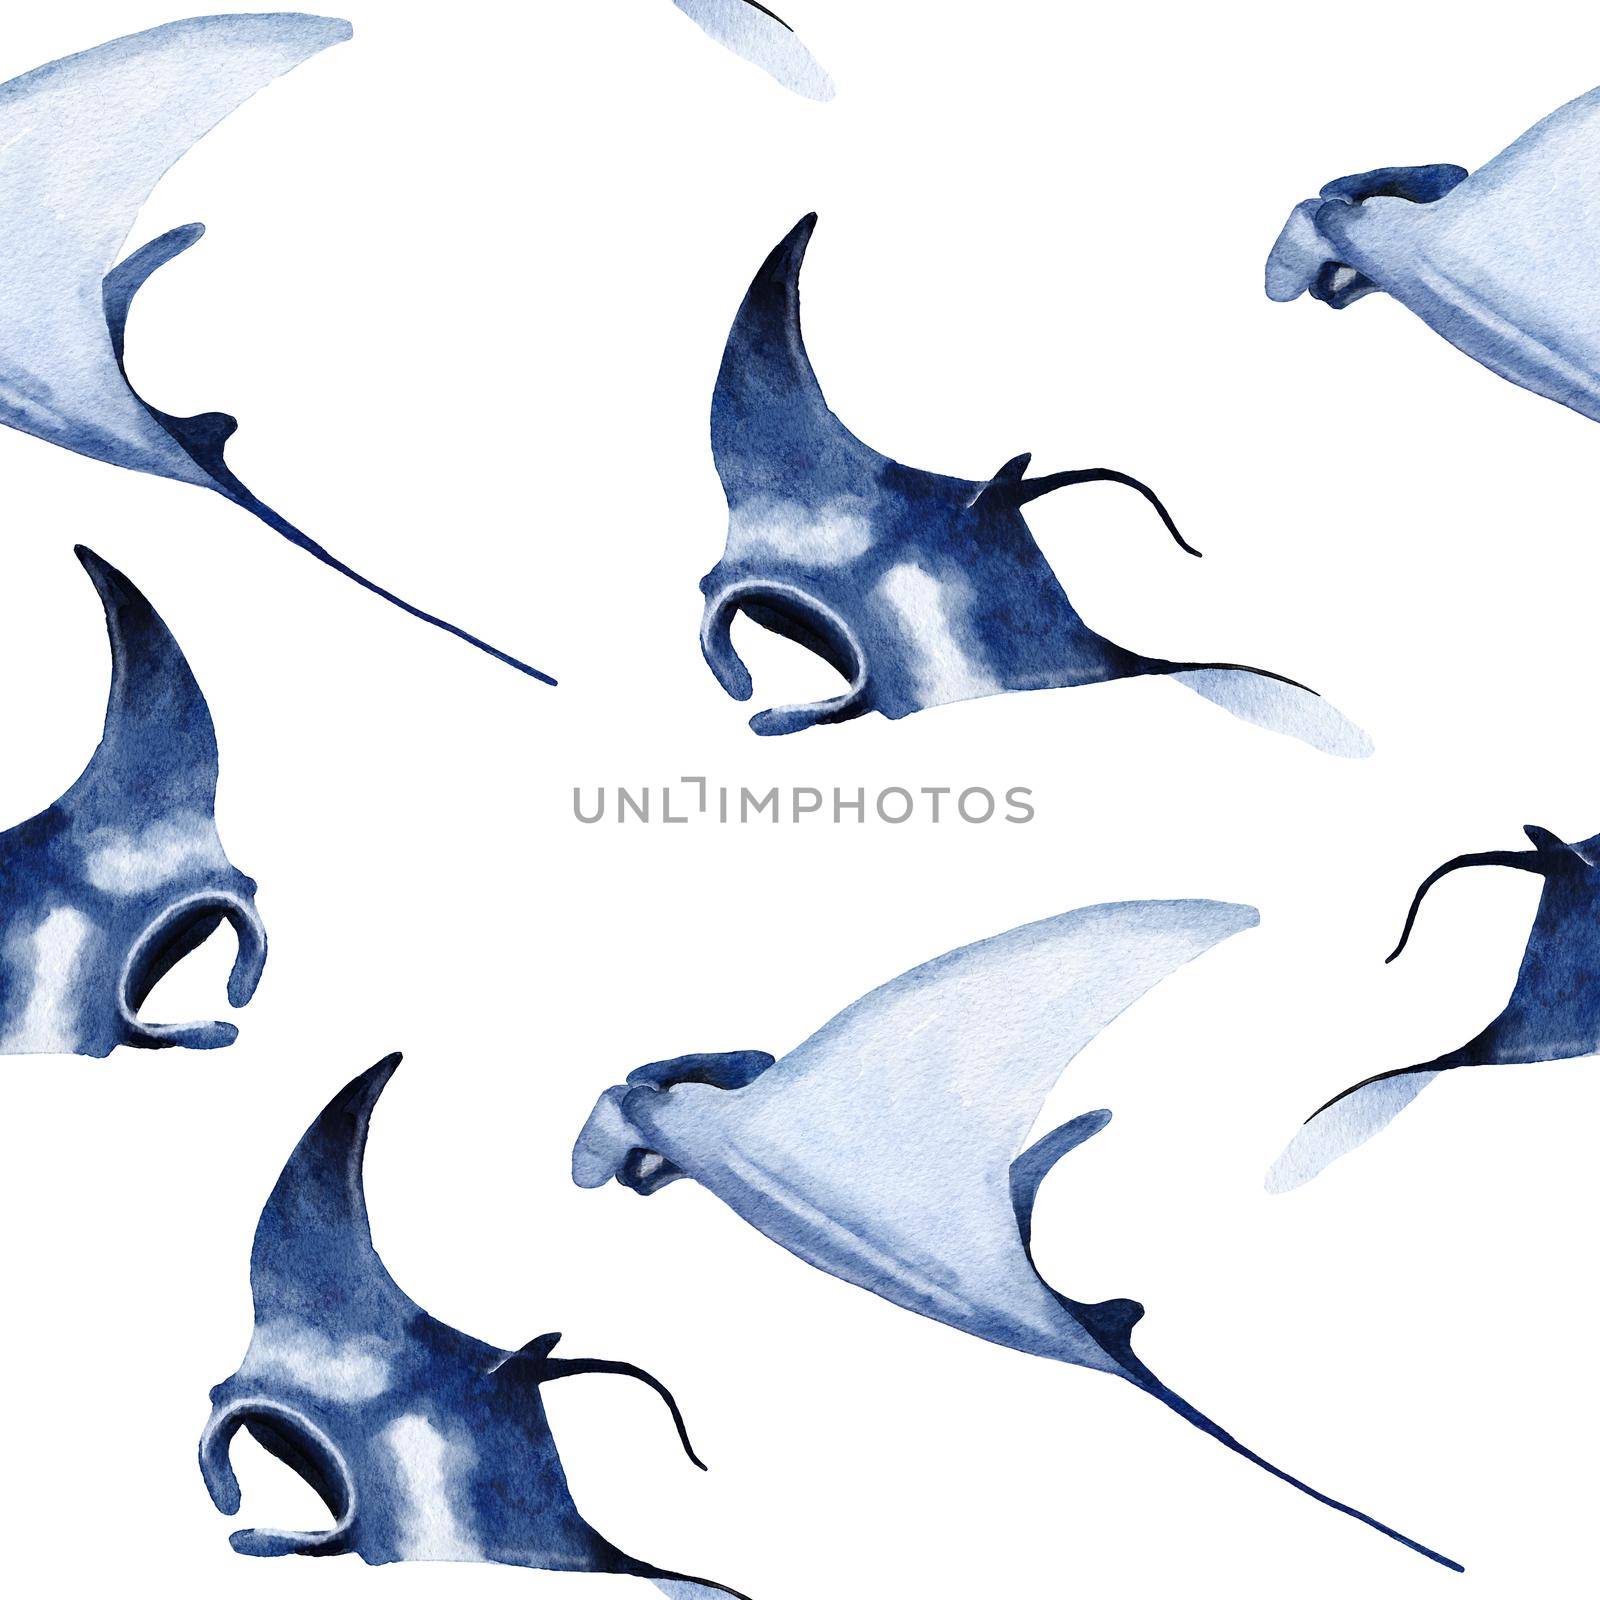 Hand drawn watercolor seamless pattern with manta ray. Sea ocean marine animal, nautical underwater endangered mammal species. Blue gray illustration for fabric nursery decor, under the sea prints. by Lagmar